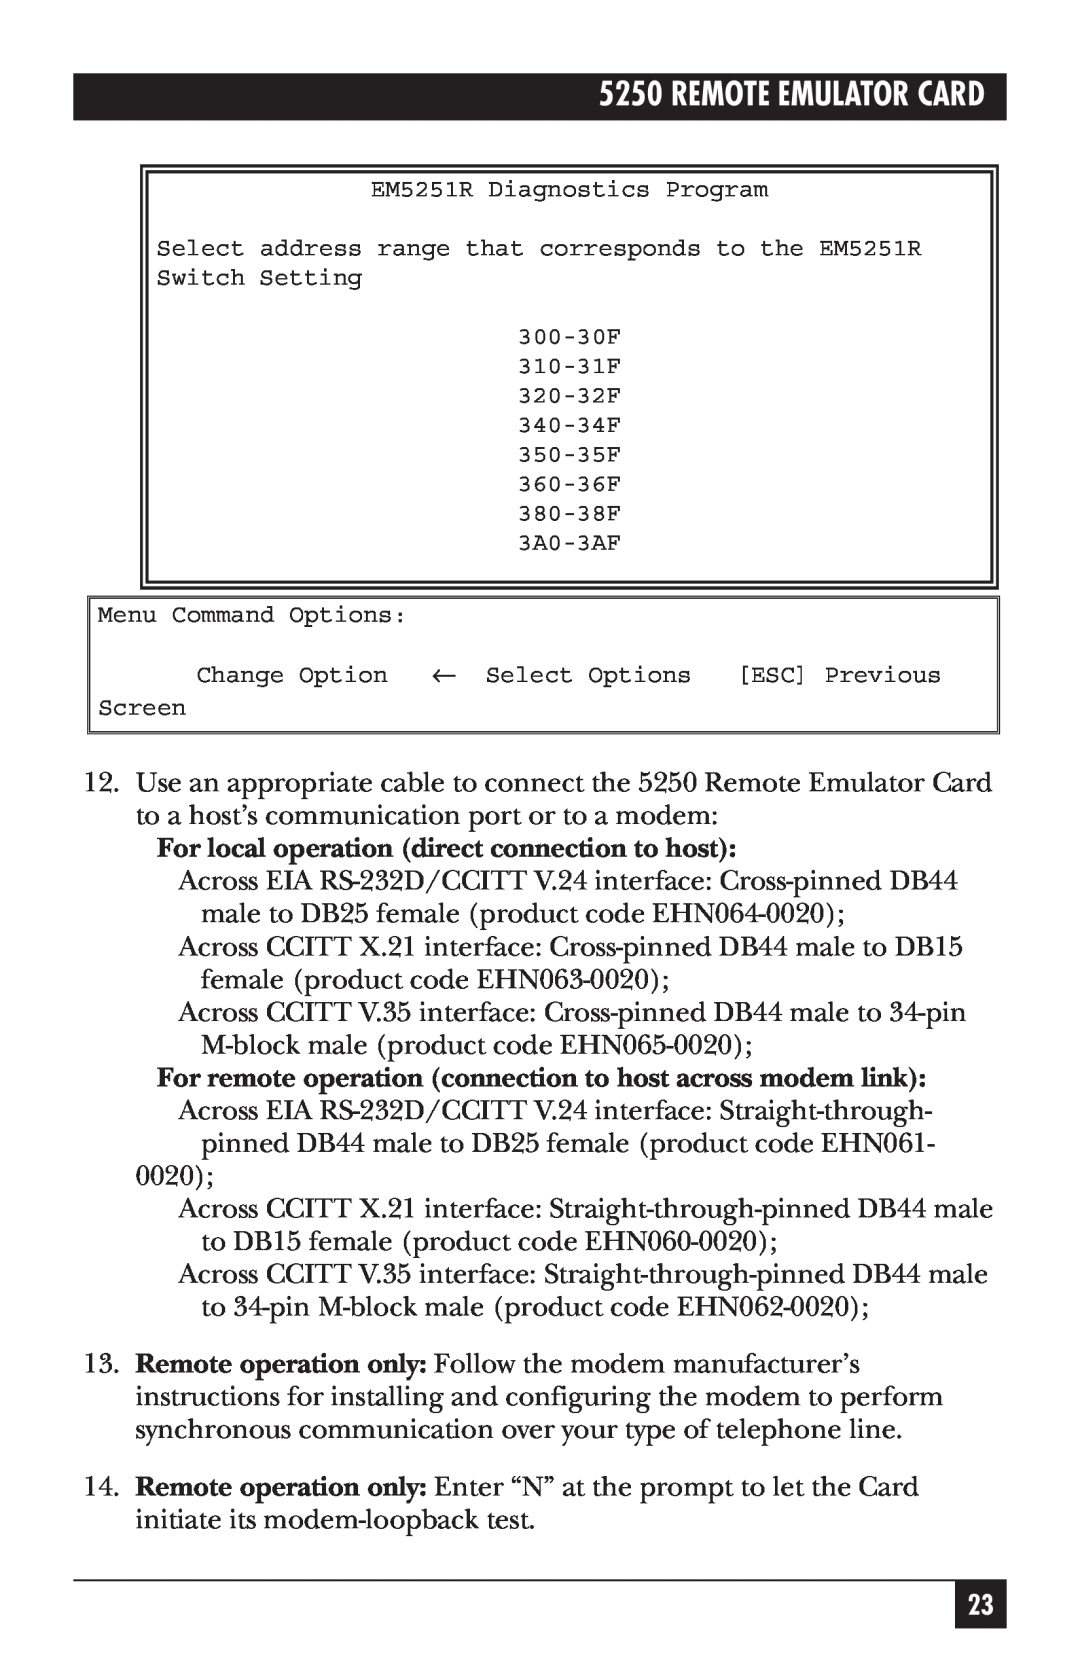 Black Box Remote Emulator Card, 5250 manual For local operation direct connection to host 